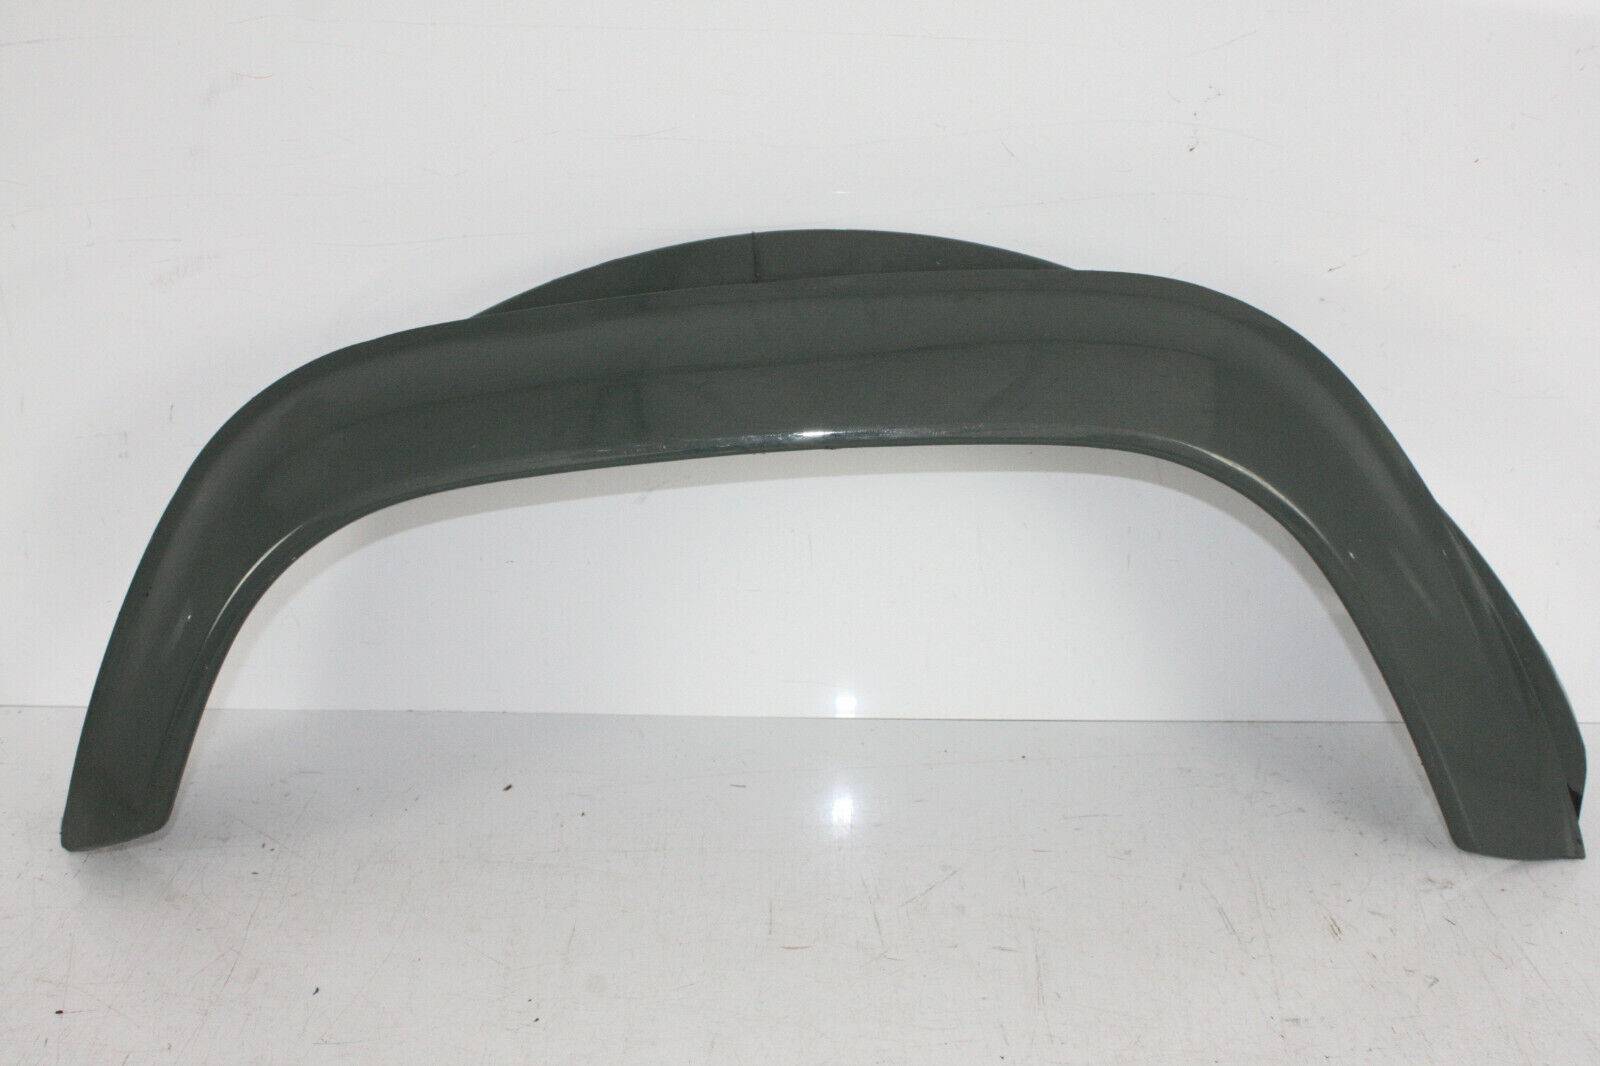 Land Rover Defender Wheel Arch Flare Spat Front Left Painted Type Genuine 176479527707